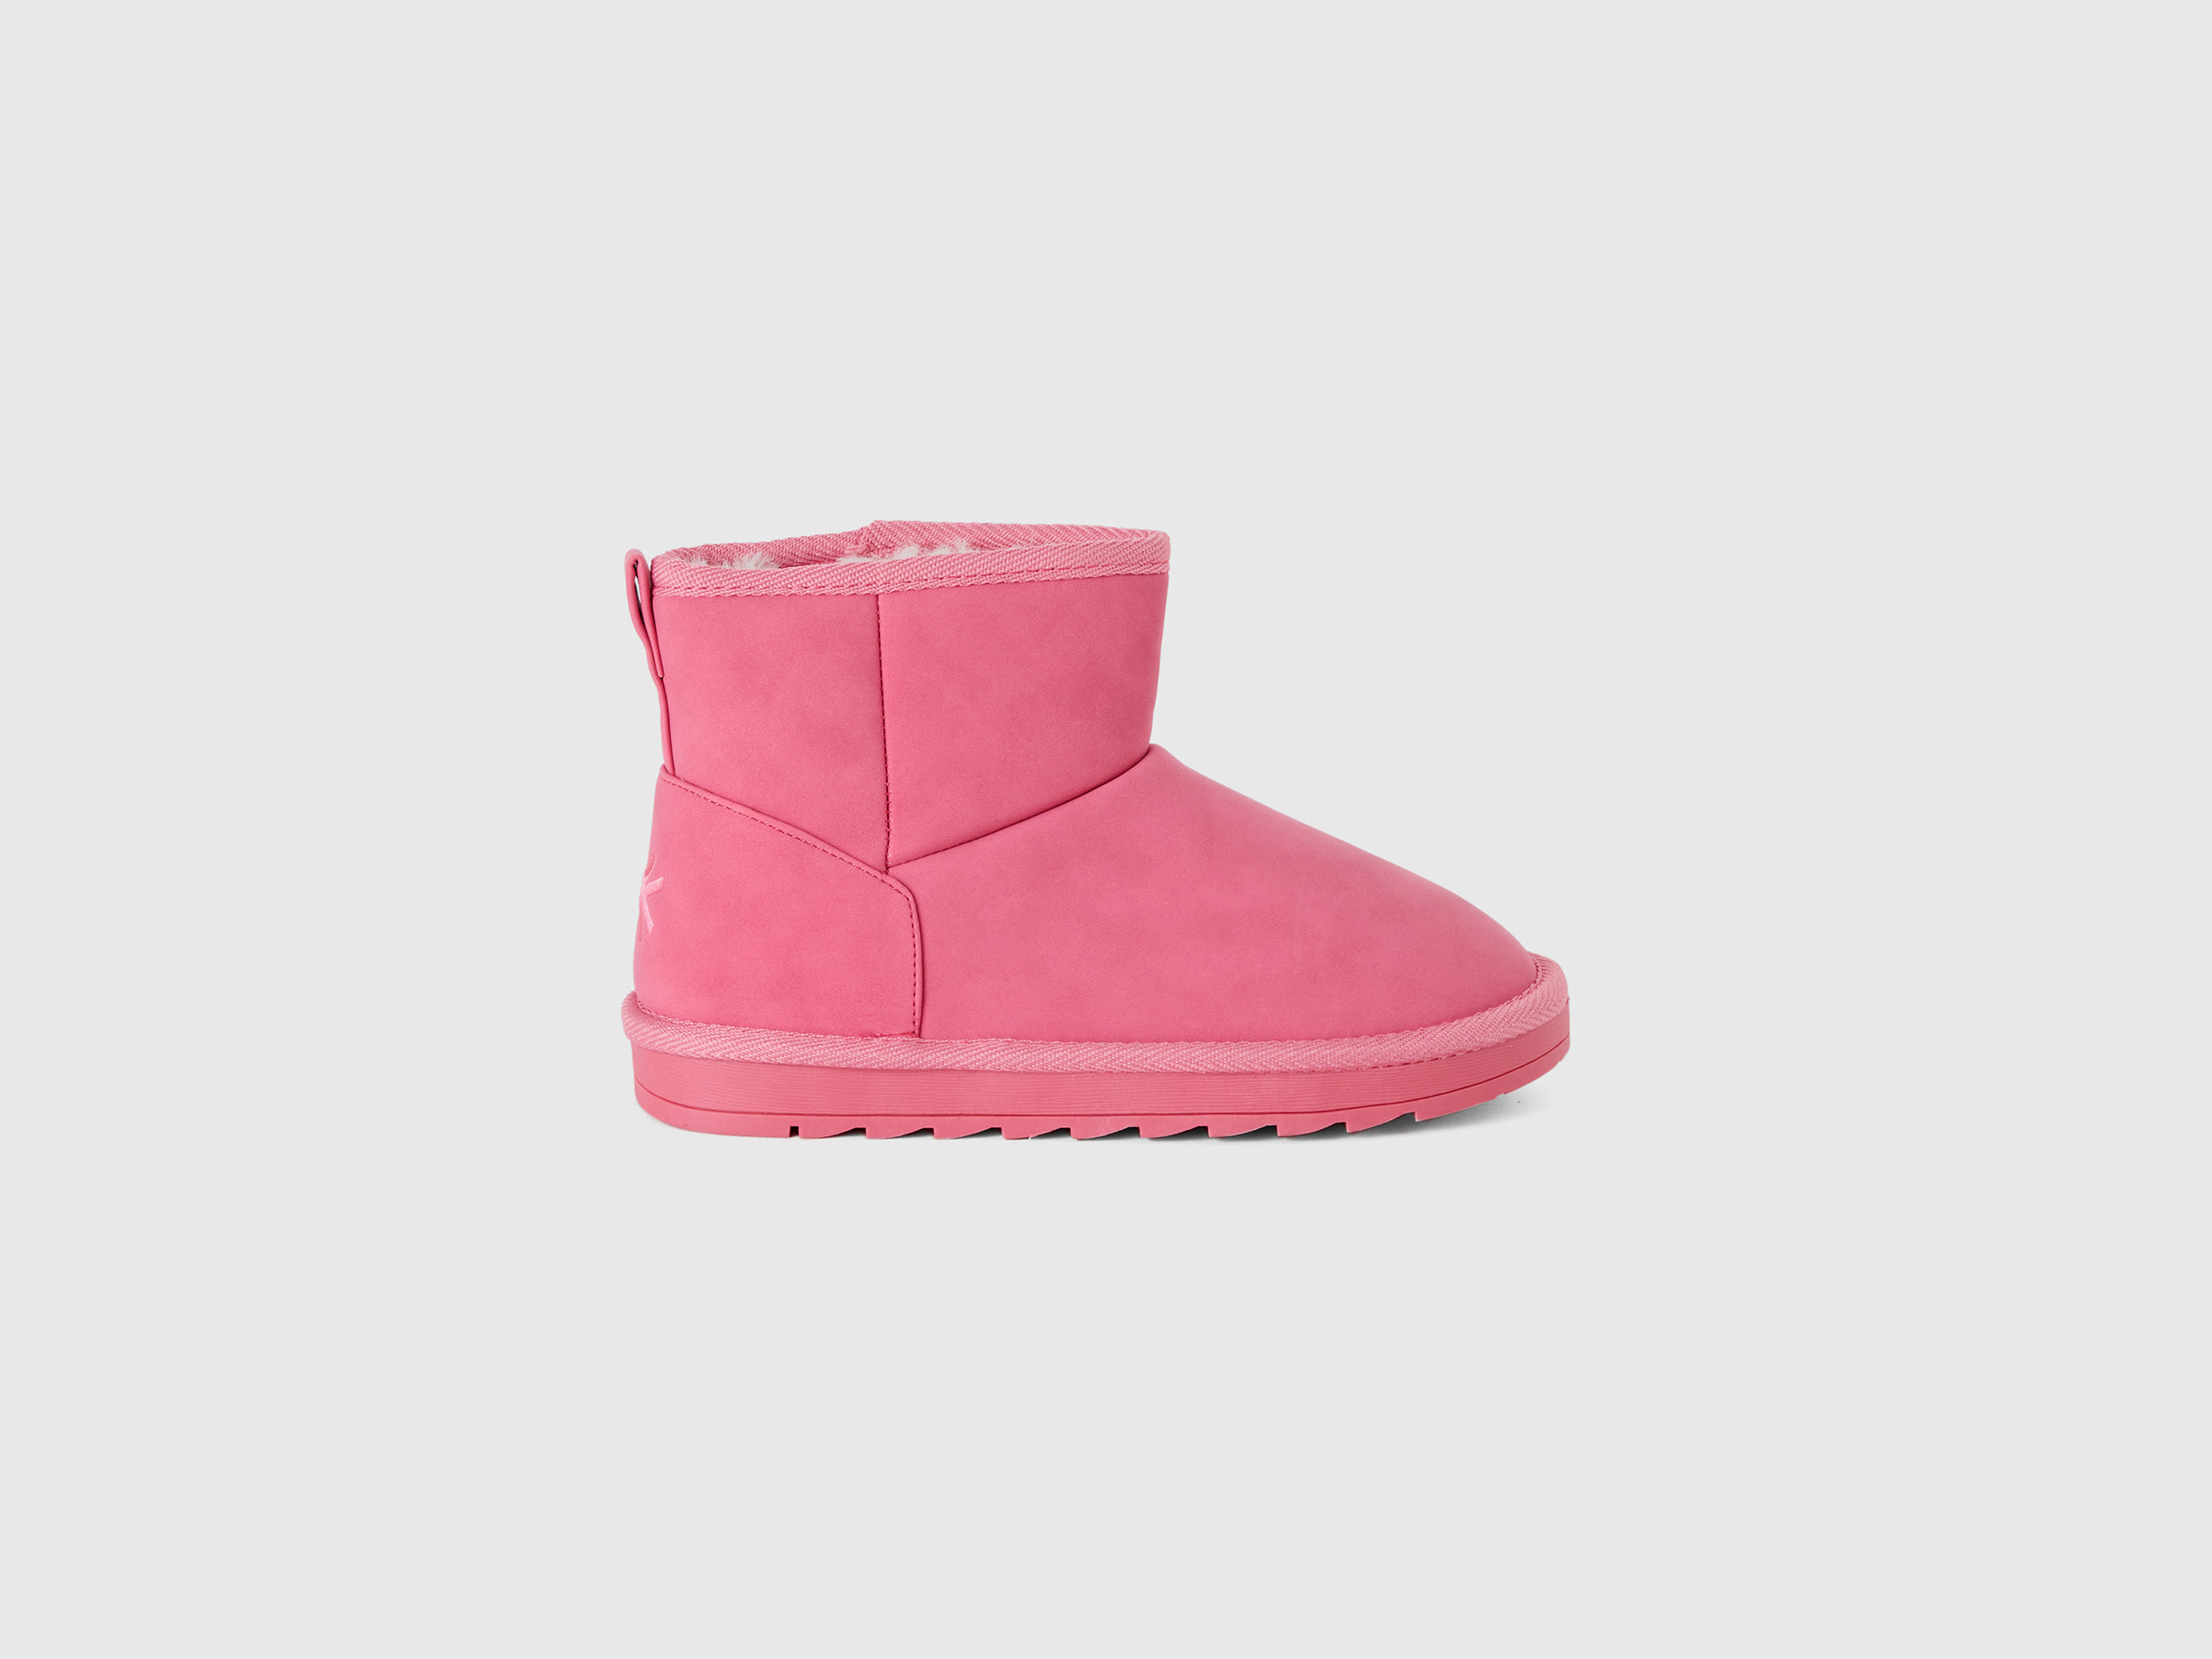 Benetton, Ankle Boots In Imitation Leather, size 4Y, Pink, Kids